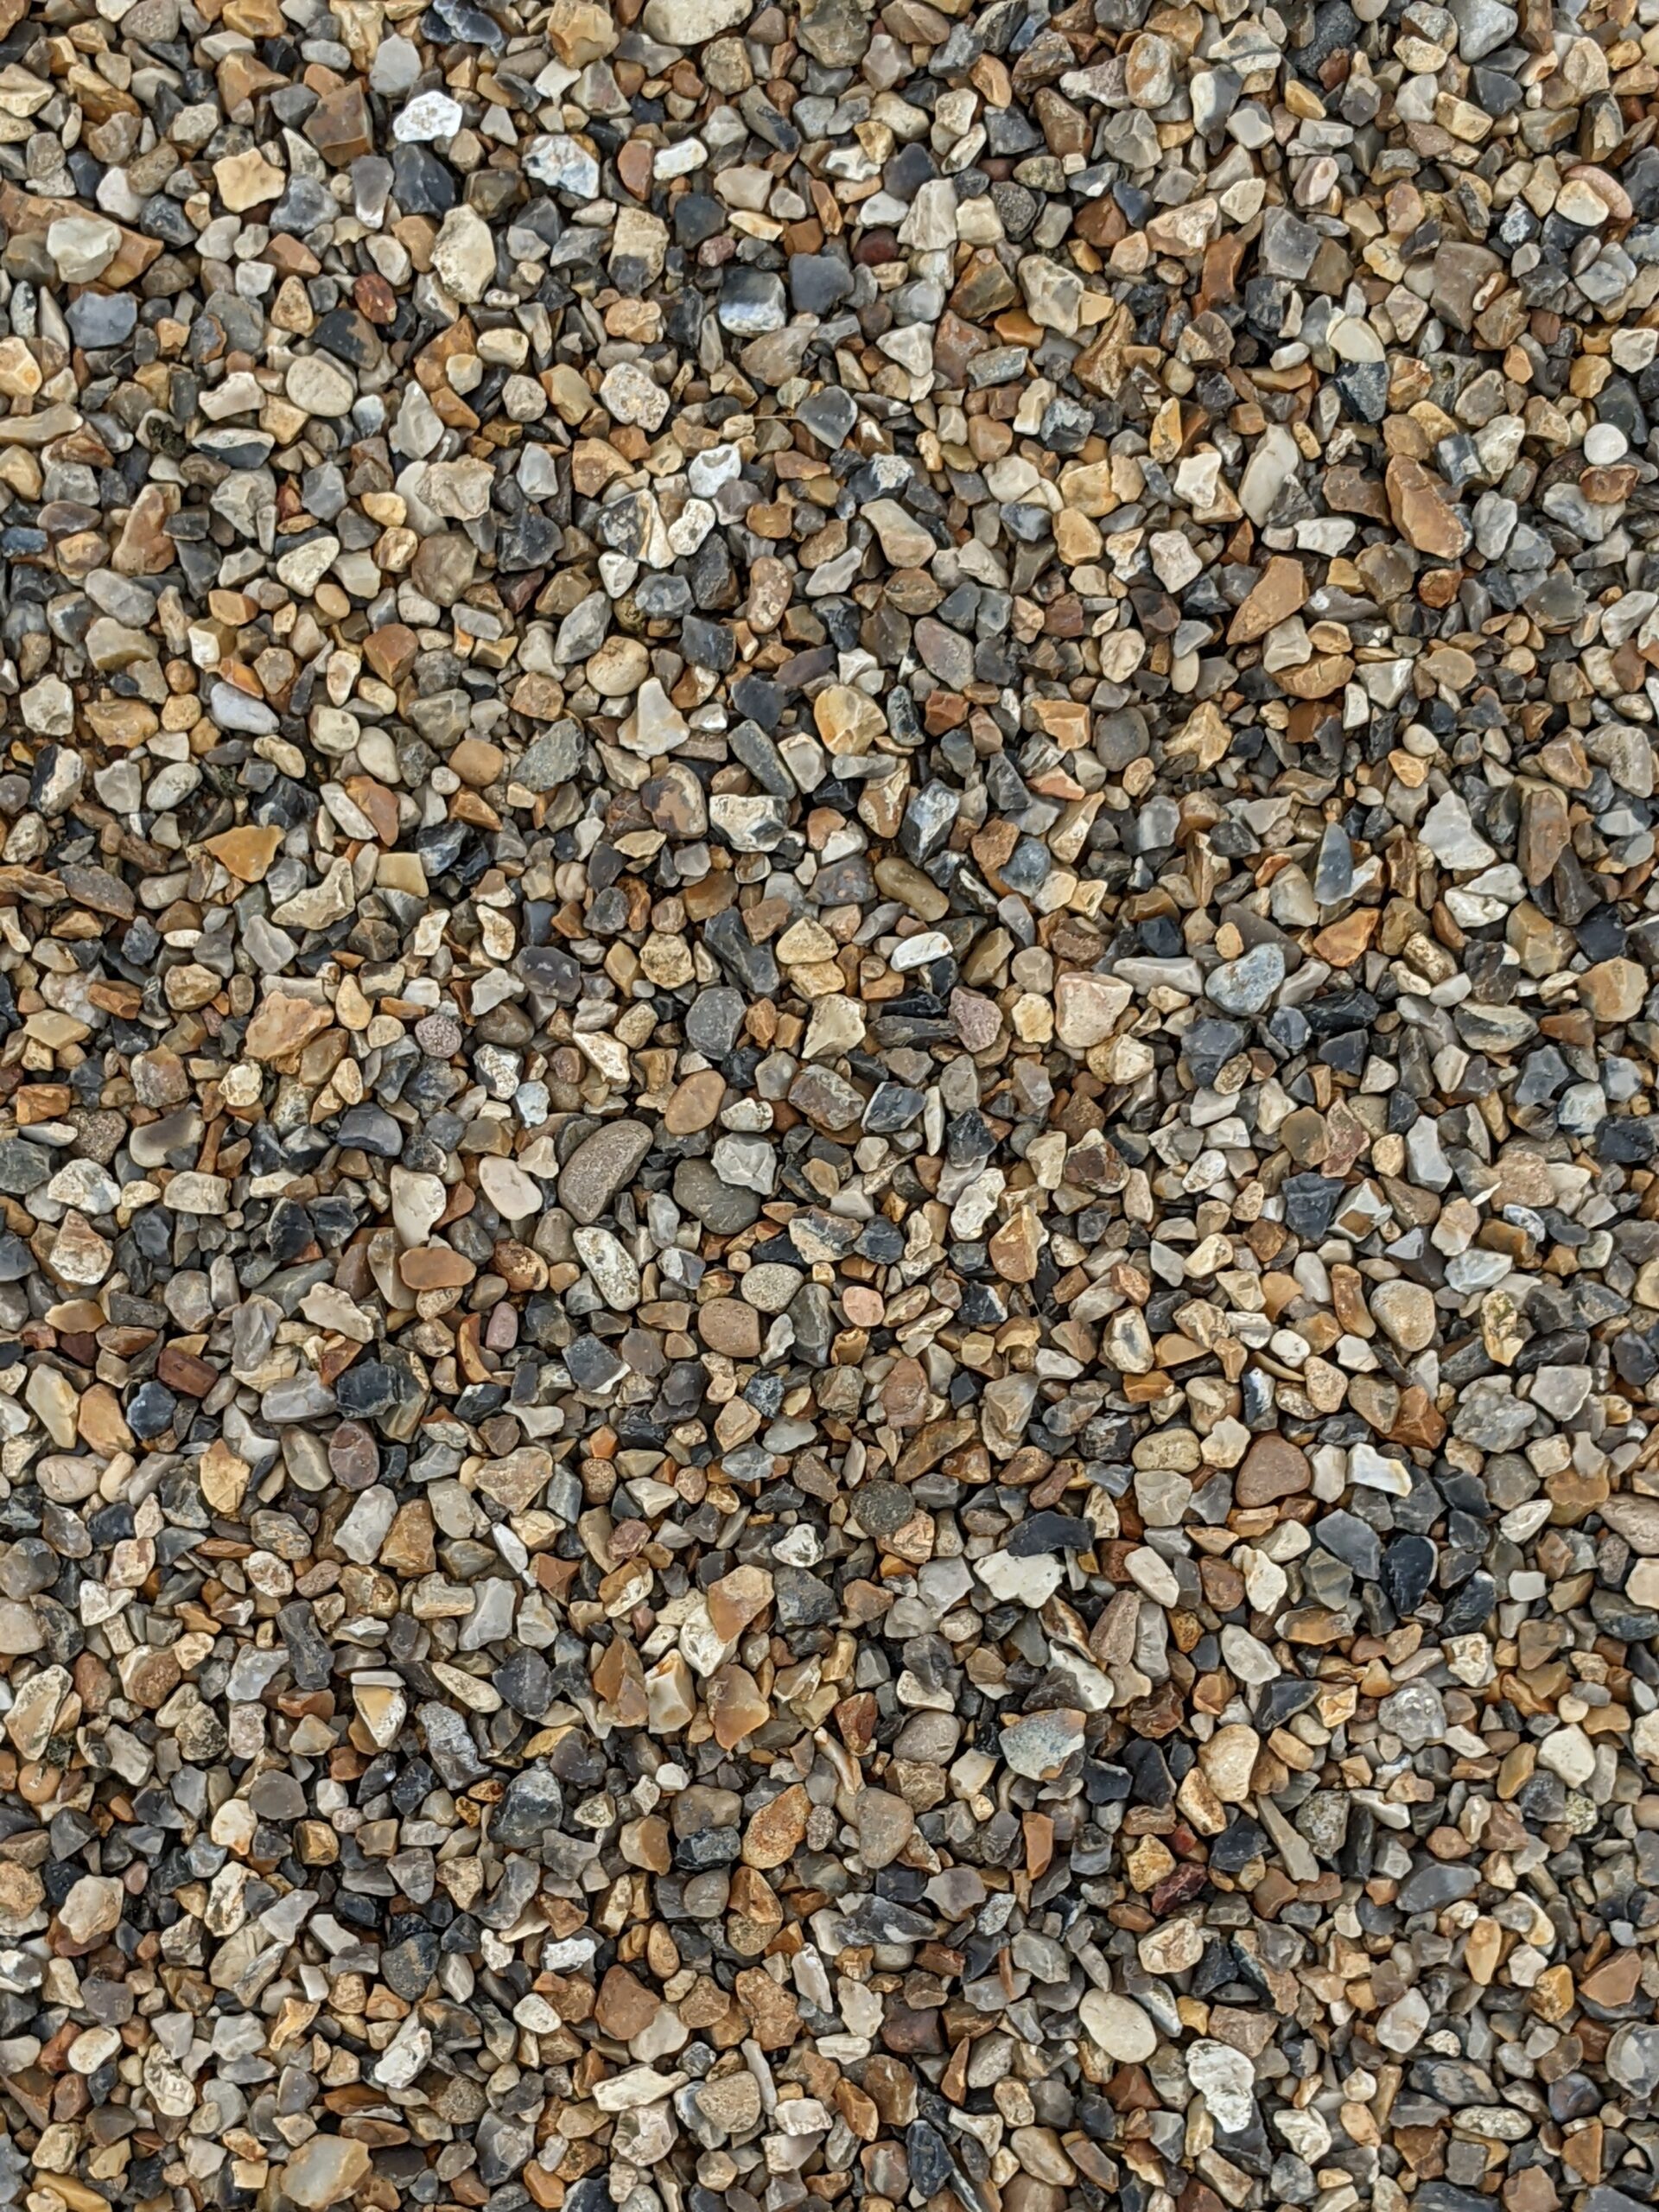 The Impact of Salt on a Gravel Driveway